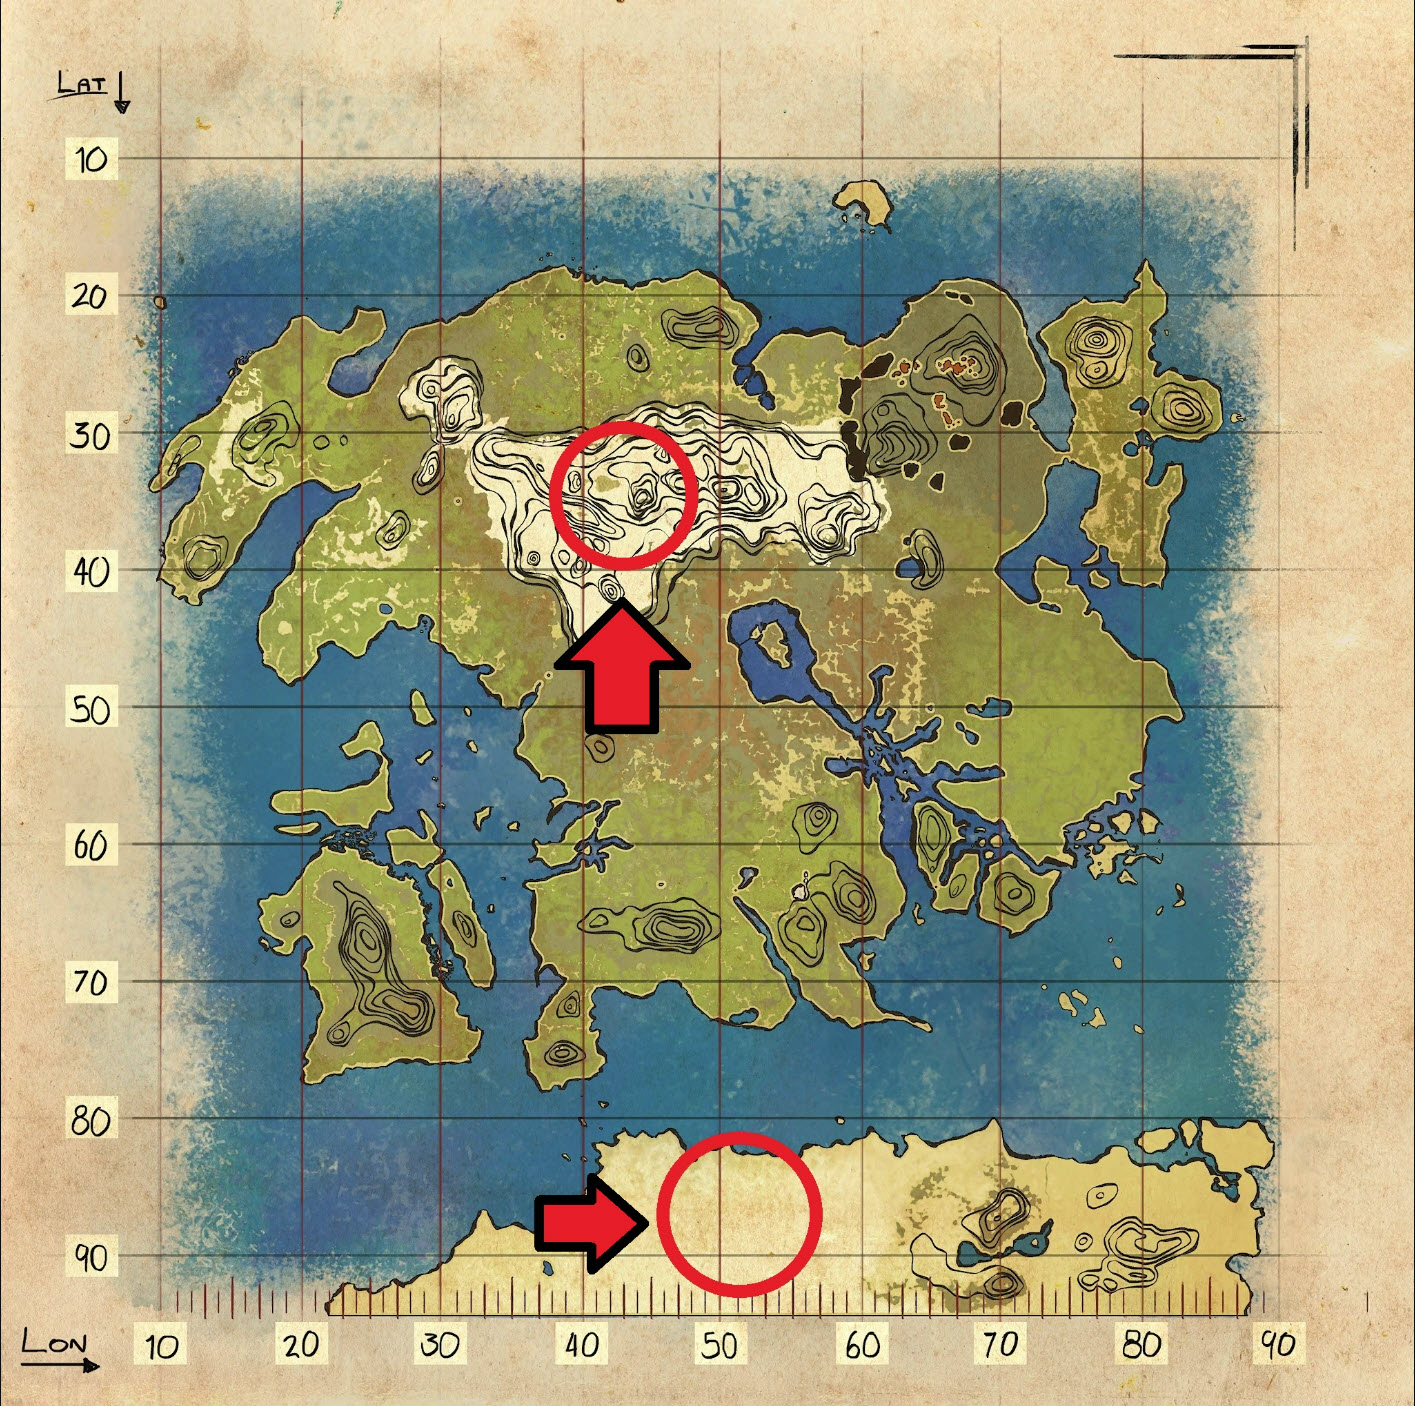 Polymer is located here in Lost Island's resource map in Ark